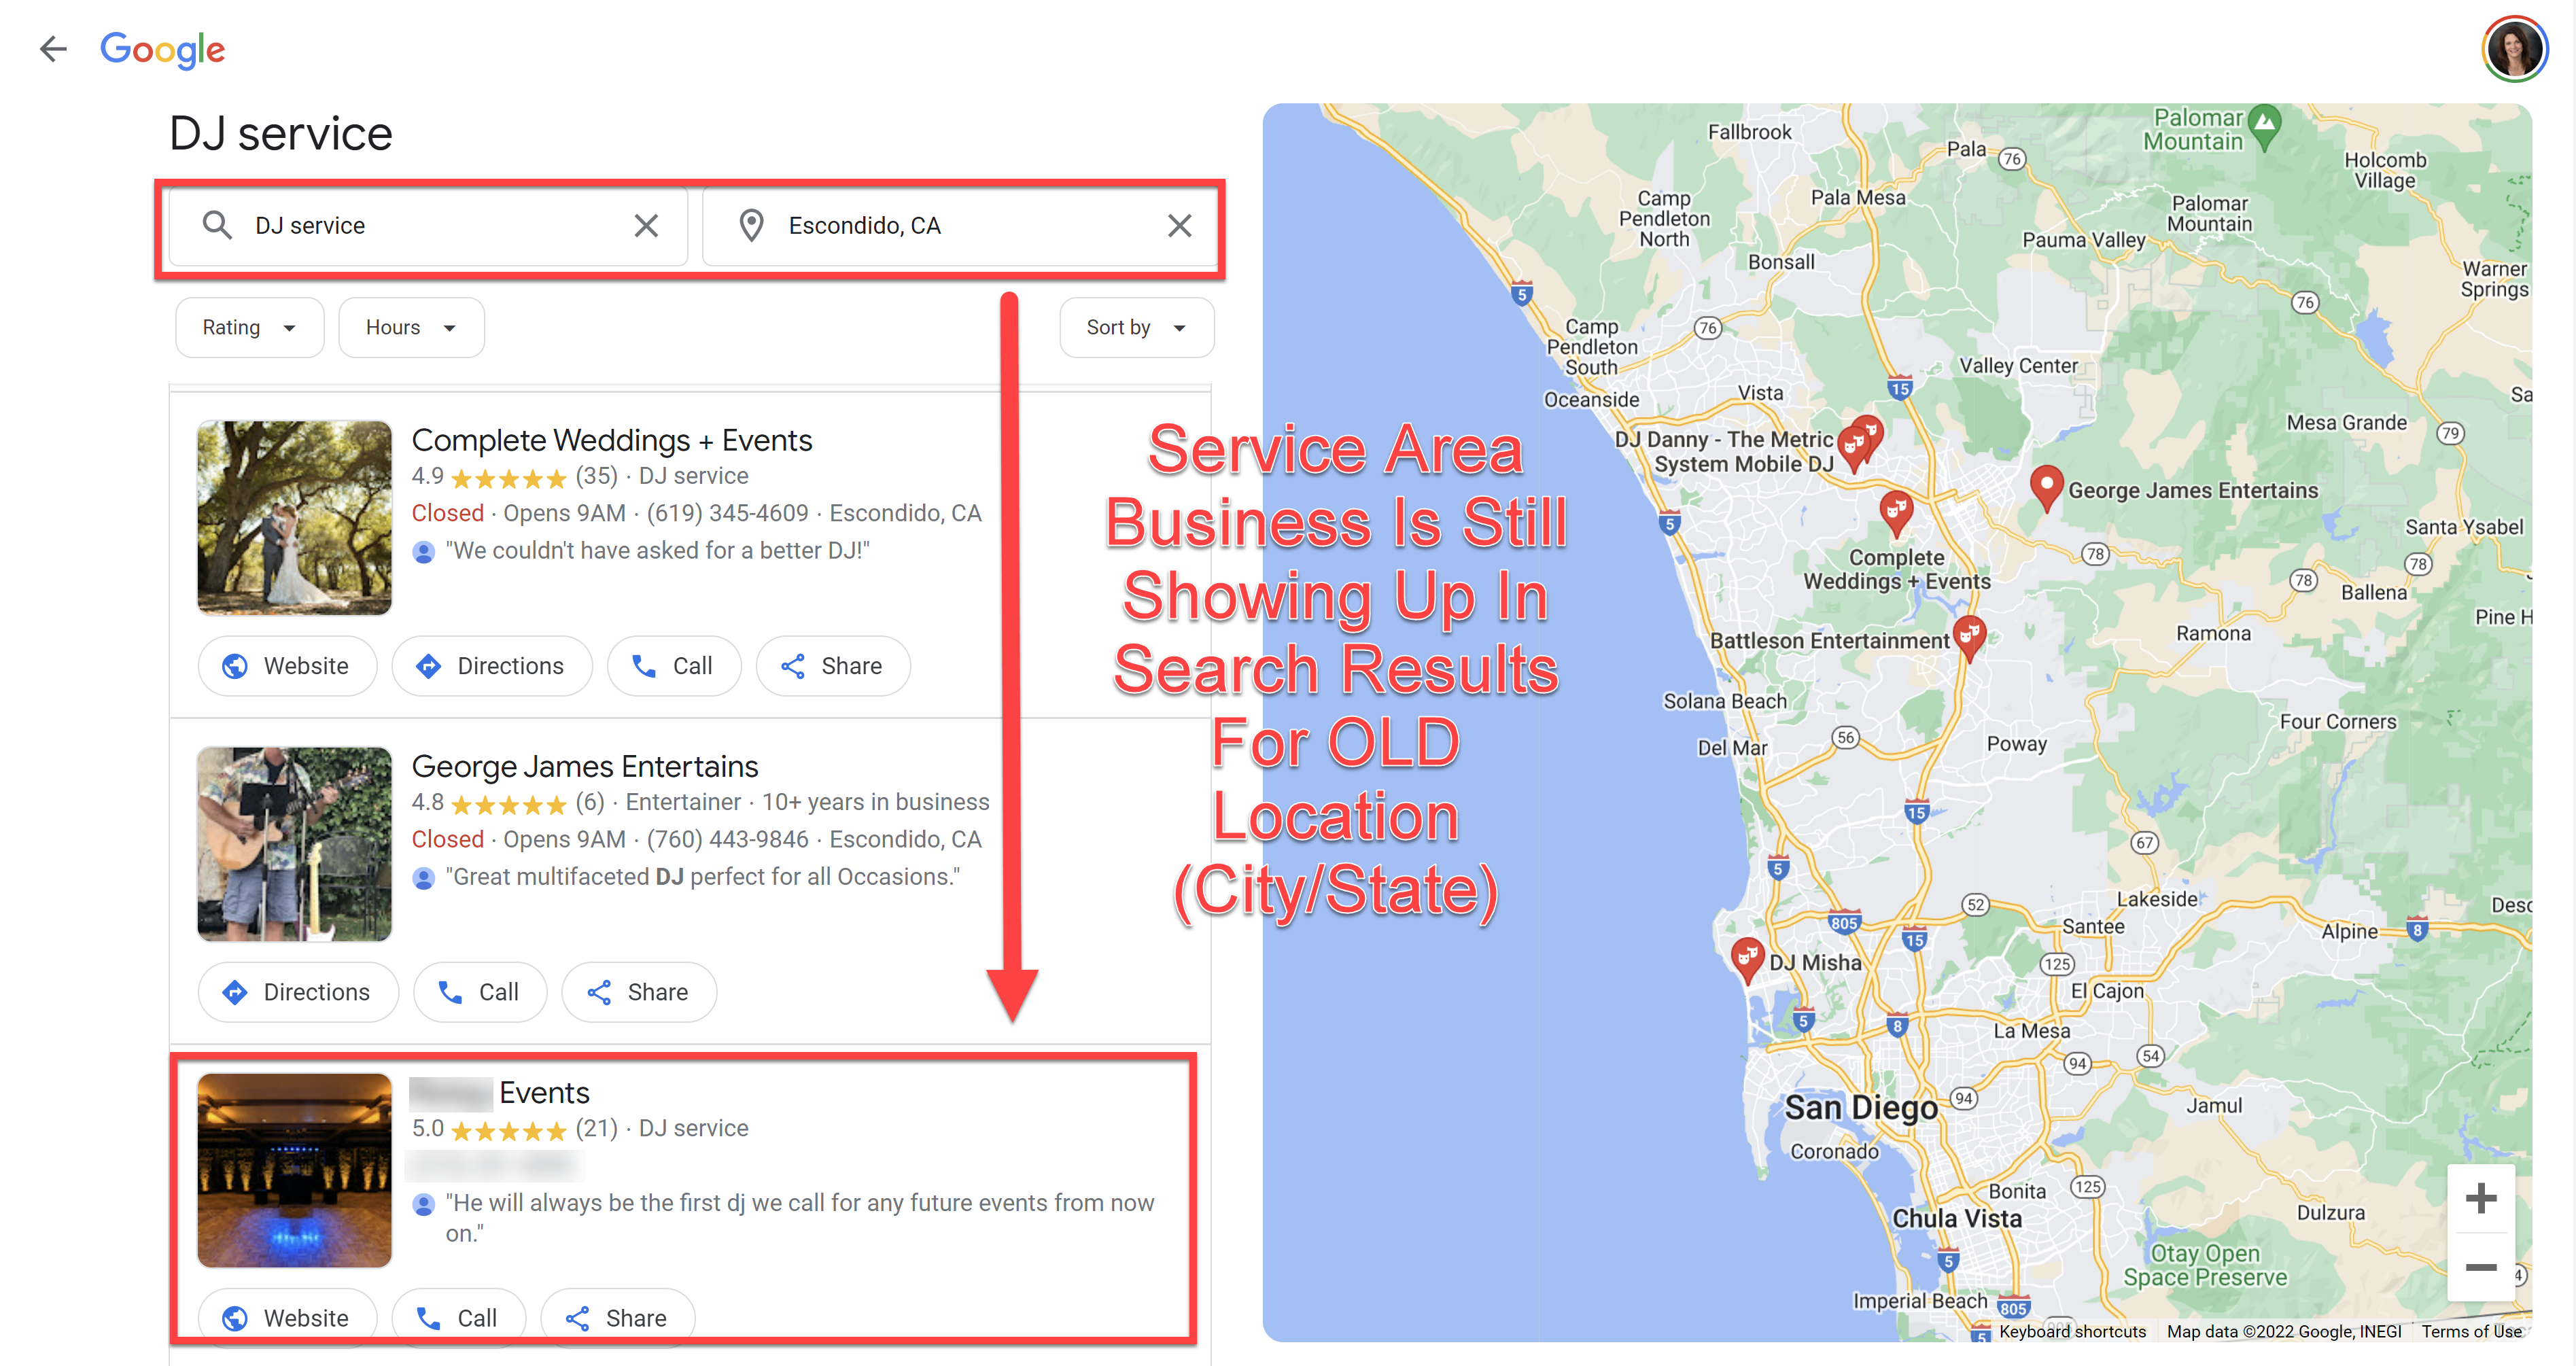 Service Area Business still showing up in search results for old location